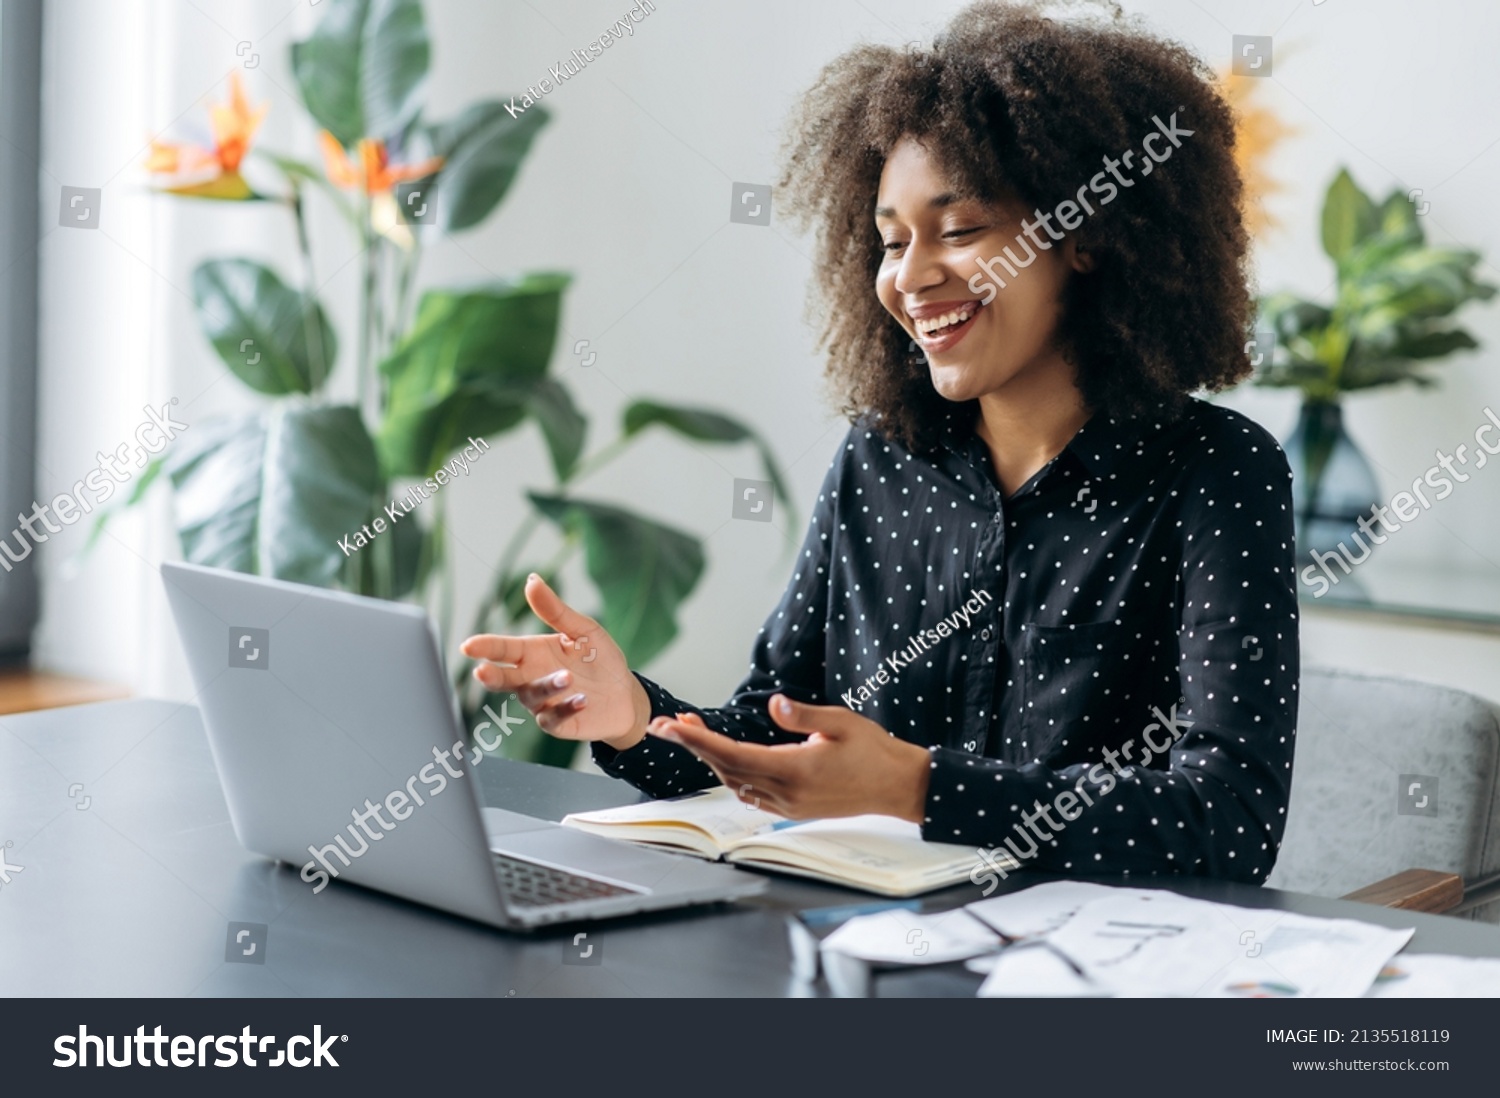 Successful positive young adult woman african woman freelancer, manager, CEO, sitting in office at laptop, talking on video call with client or employees, discussing business strategy, gesturing,smile #2135518119